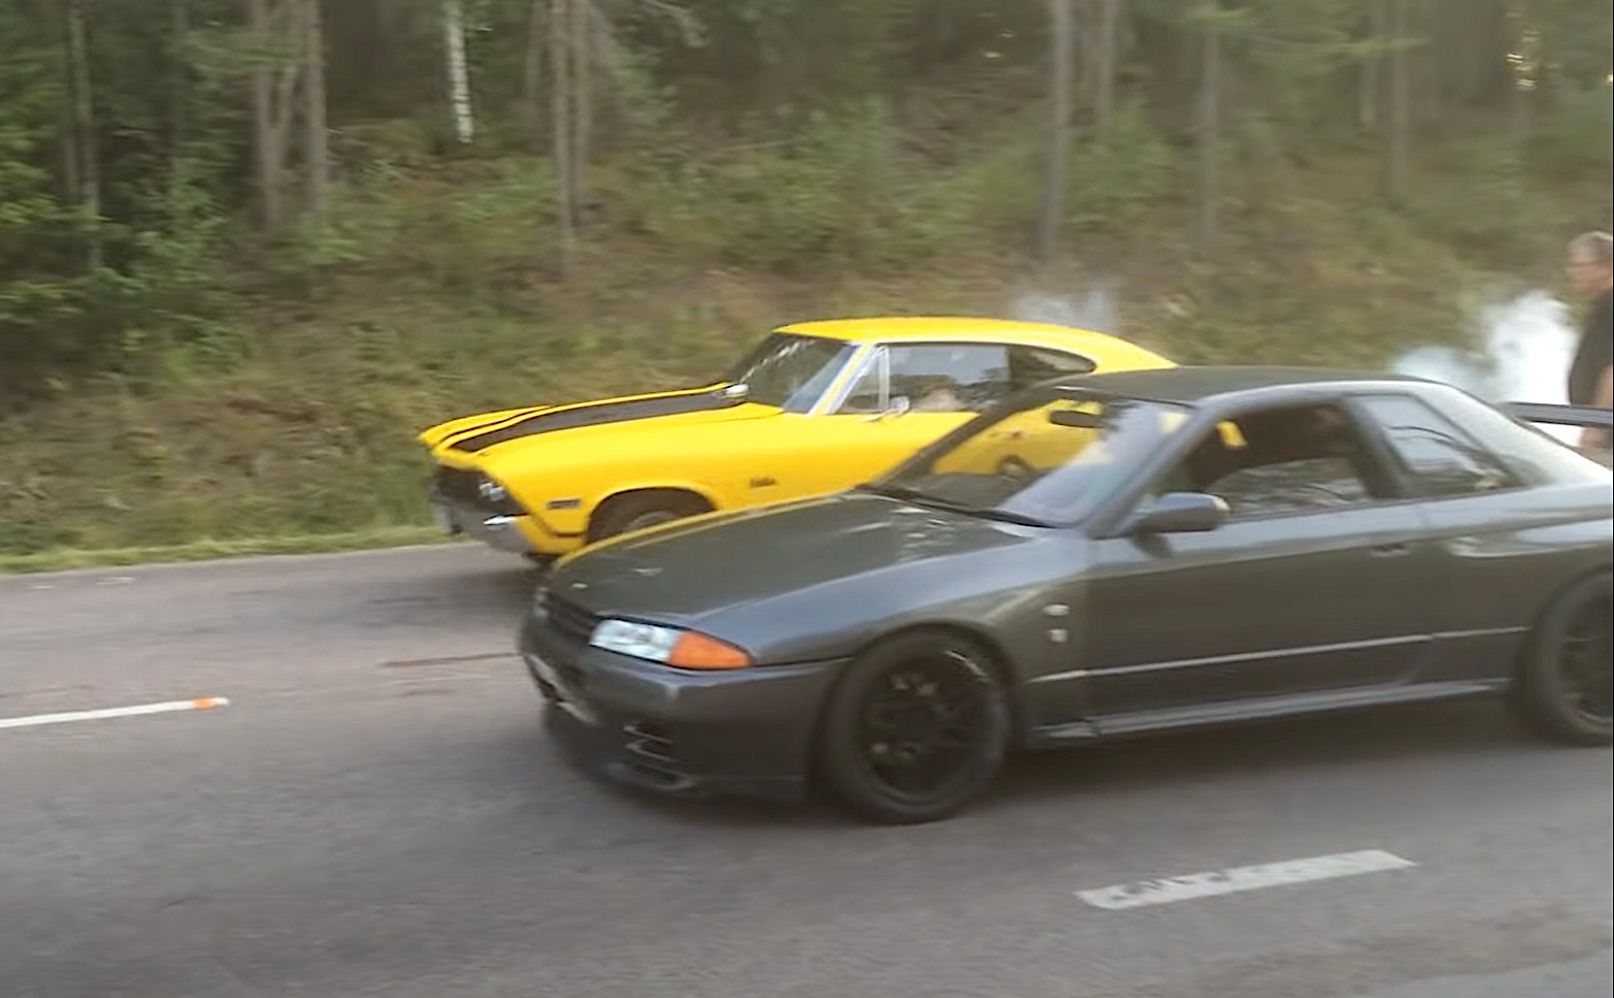 Chevelle Races Nissan Skyline And You Won’t Believe The Outcome